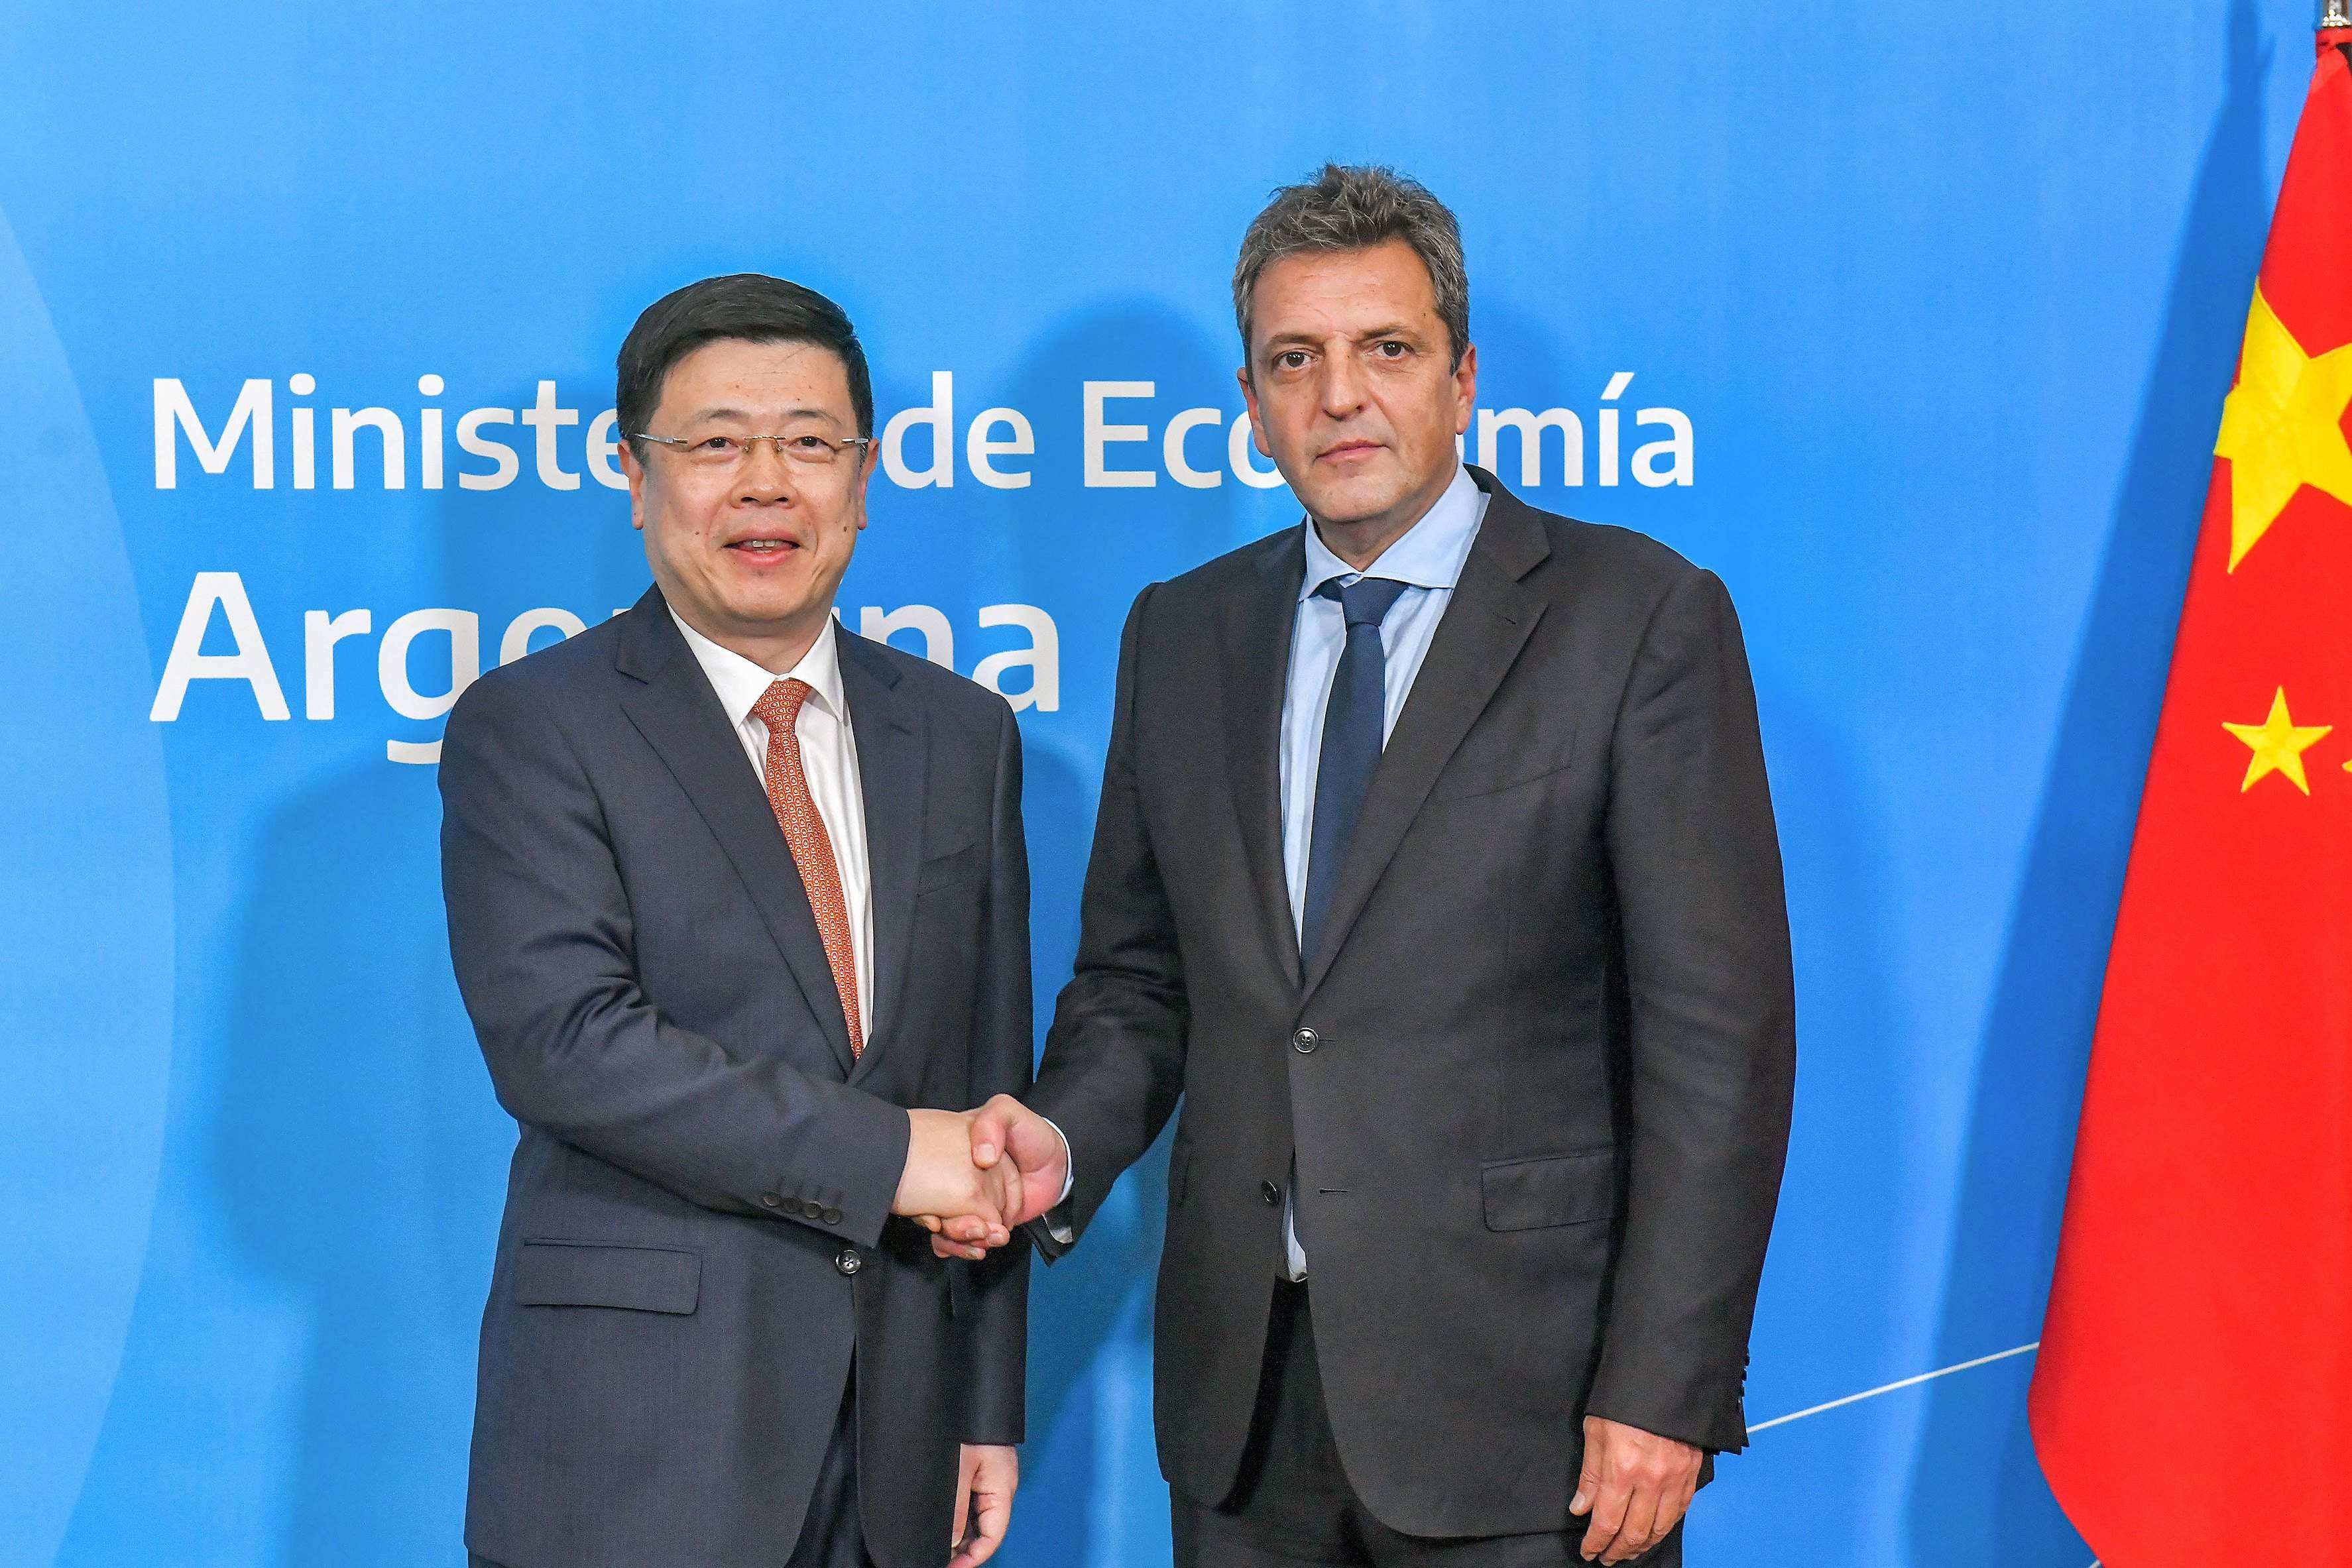 Argentine Economy Minister Sergio Massa and Chinese ambassador Zou Xiaoli shake hands after signing a currency swap agreement in Buenos Aires on April 26. Argentina joins a growing group of countries paying for Chinese imports in yuan, rather then the dollar. Photo: Argentina’s Economy Ministry/AFP